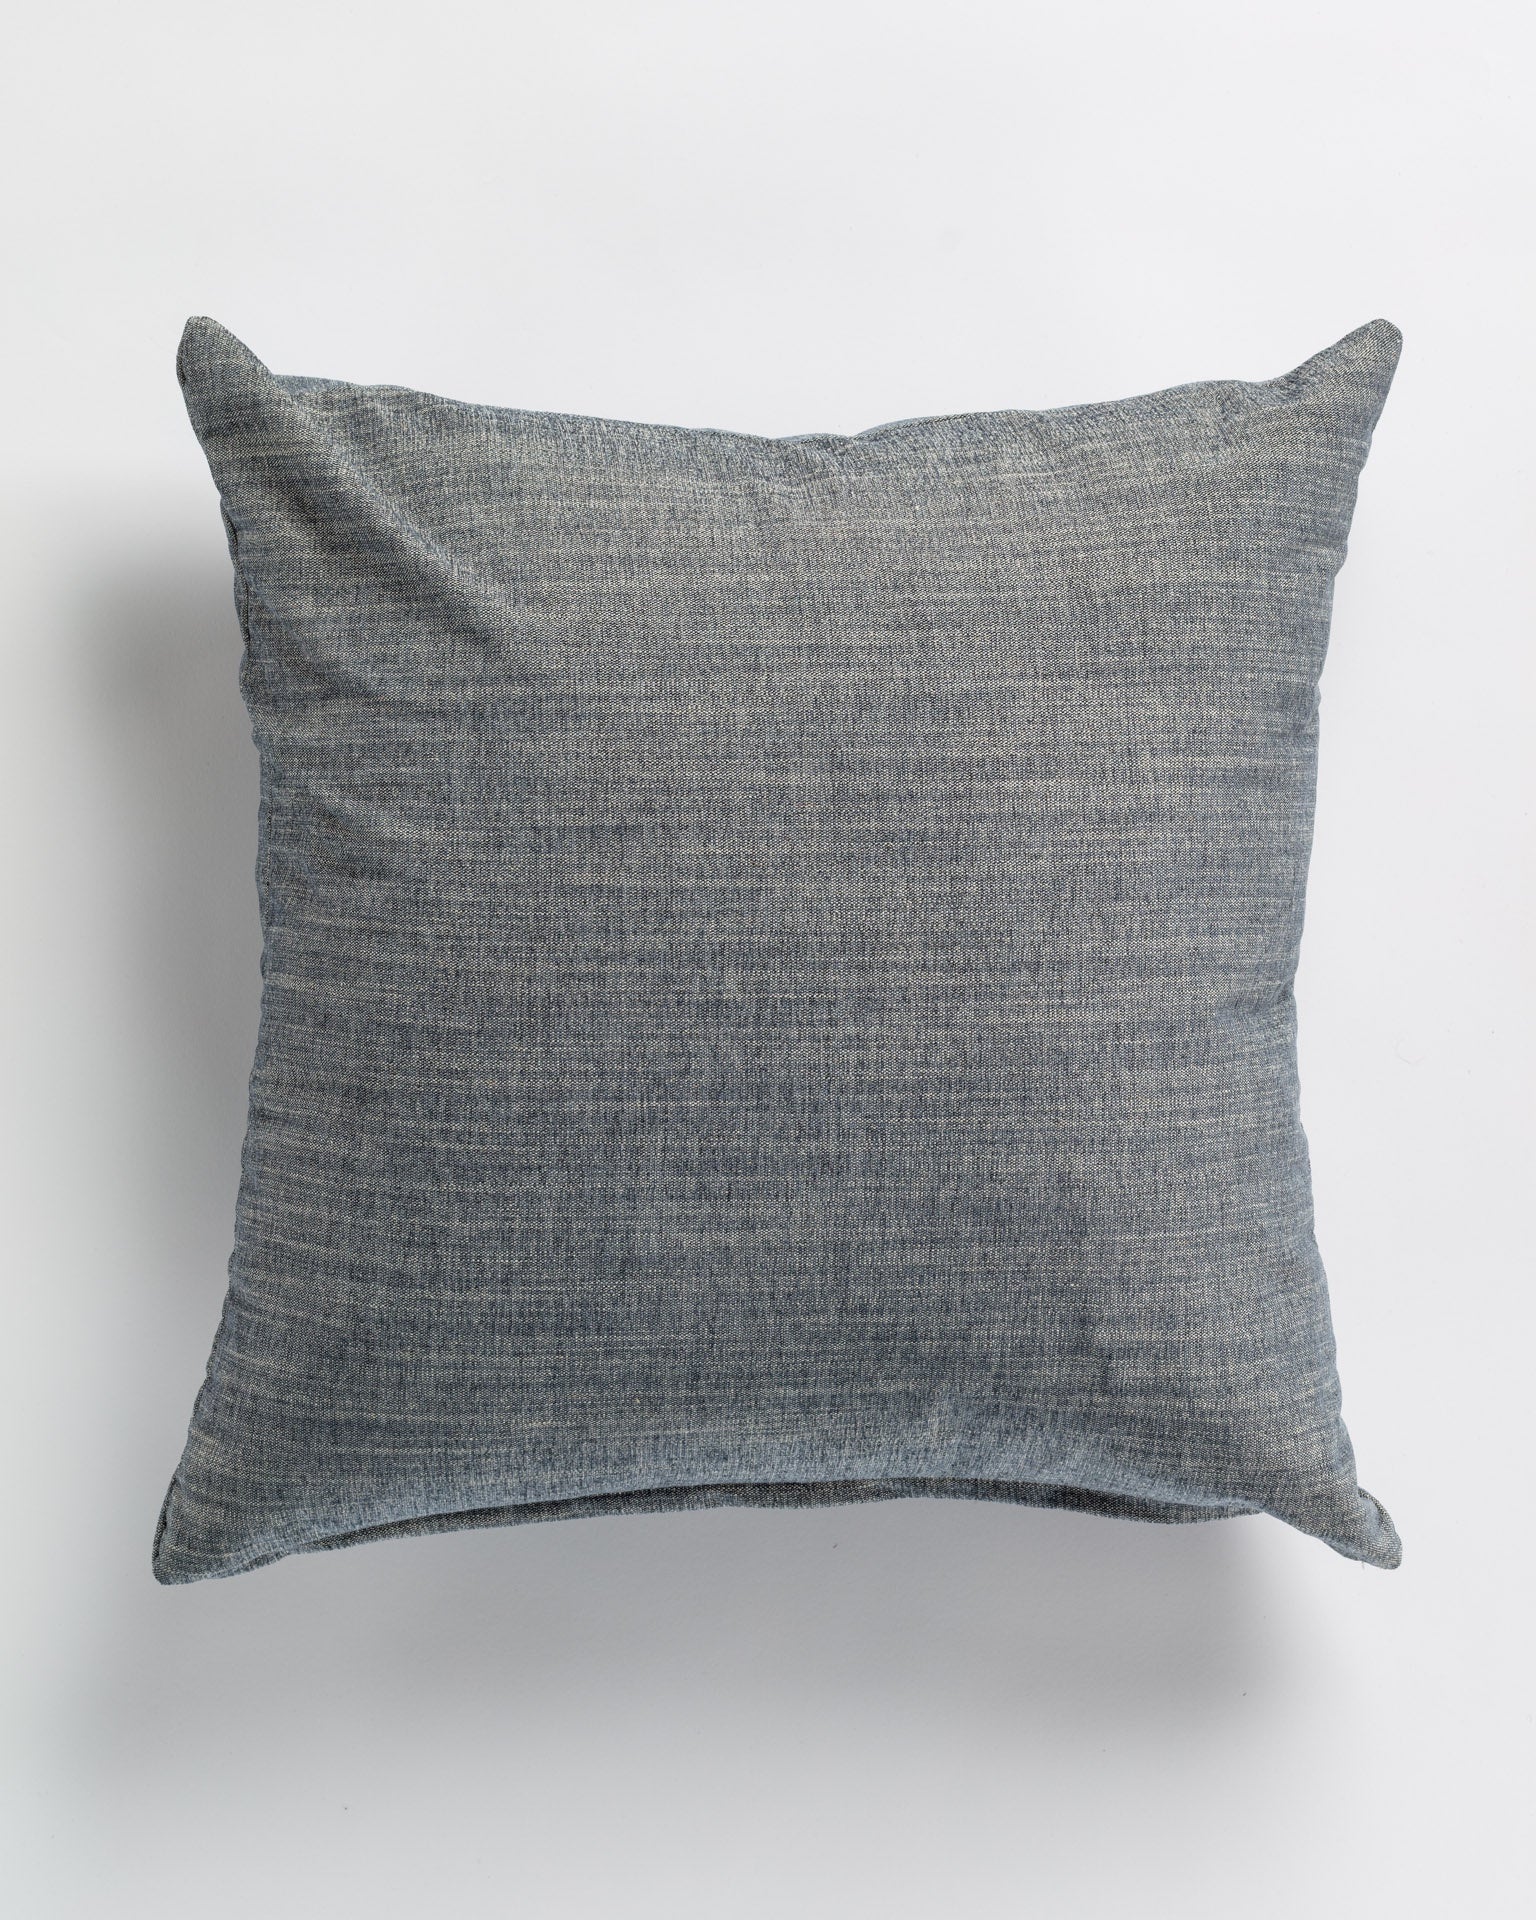 A Carter Nordic Pillow 26x26&quot; from Gabby, with a fine texture, displayed against a plain white background in a Scottsdale Arizona bungalow. The pillow is plump and square-shaped, featuring visible stitching along the edges.